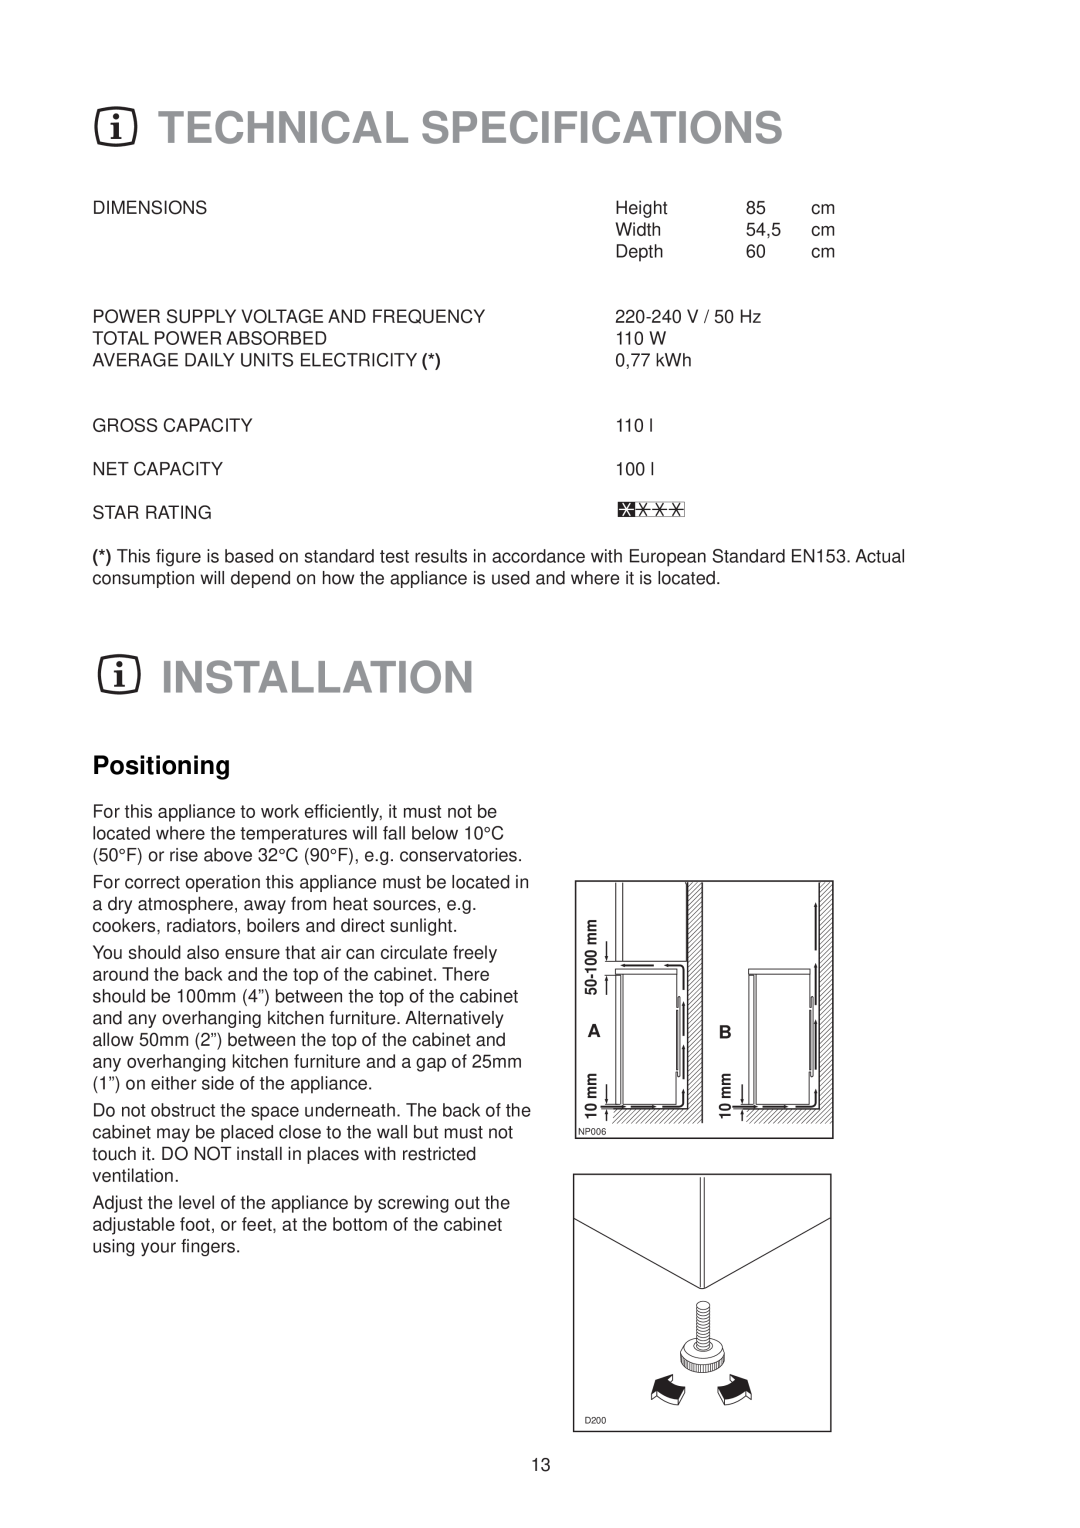 Zanussi ZF 54 SI, ZF 54 W manual Technical Specifications, Installation, Positioning 